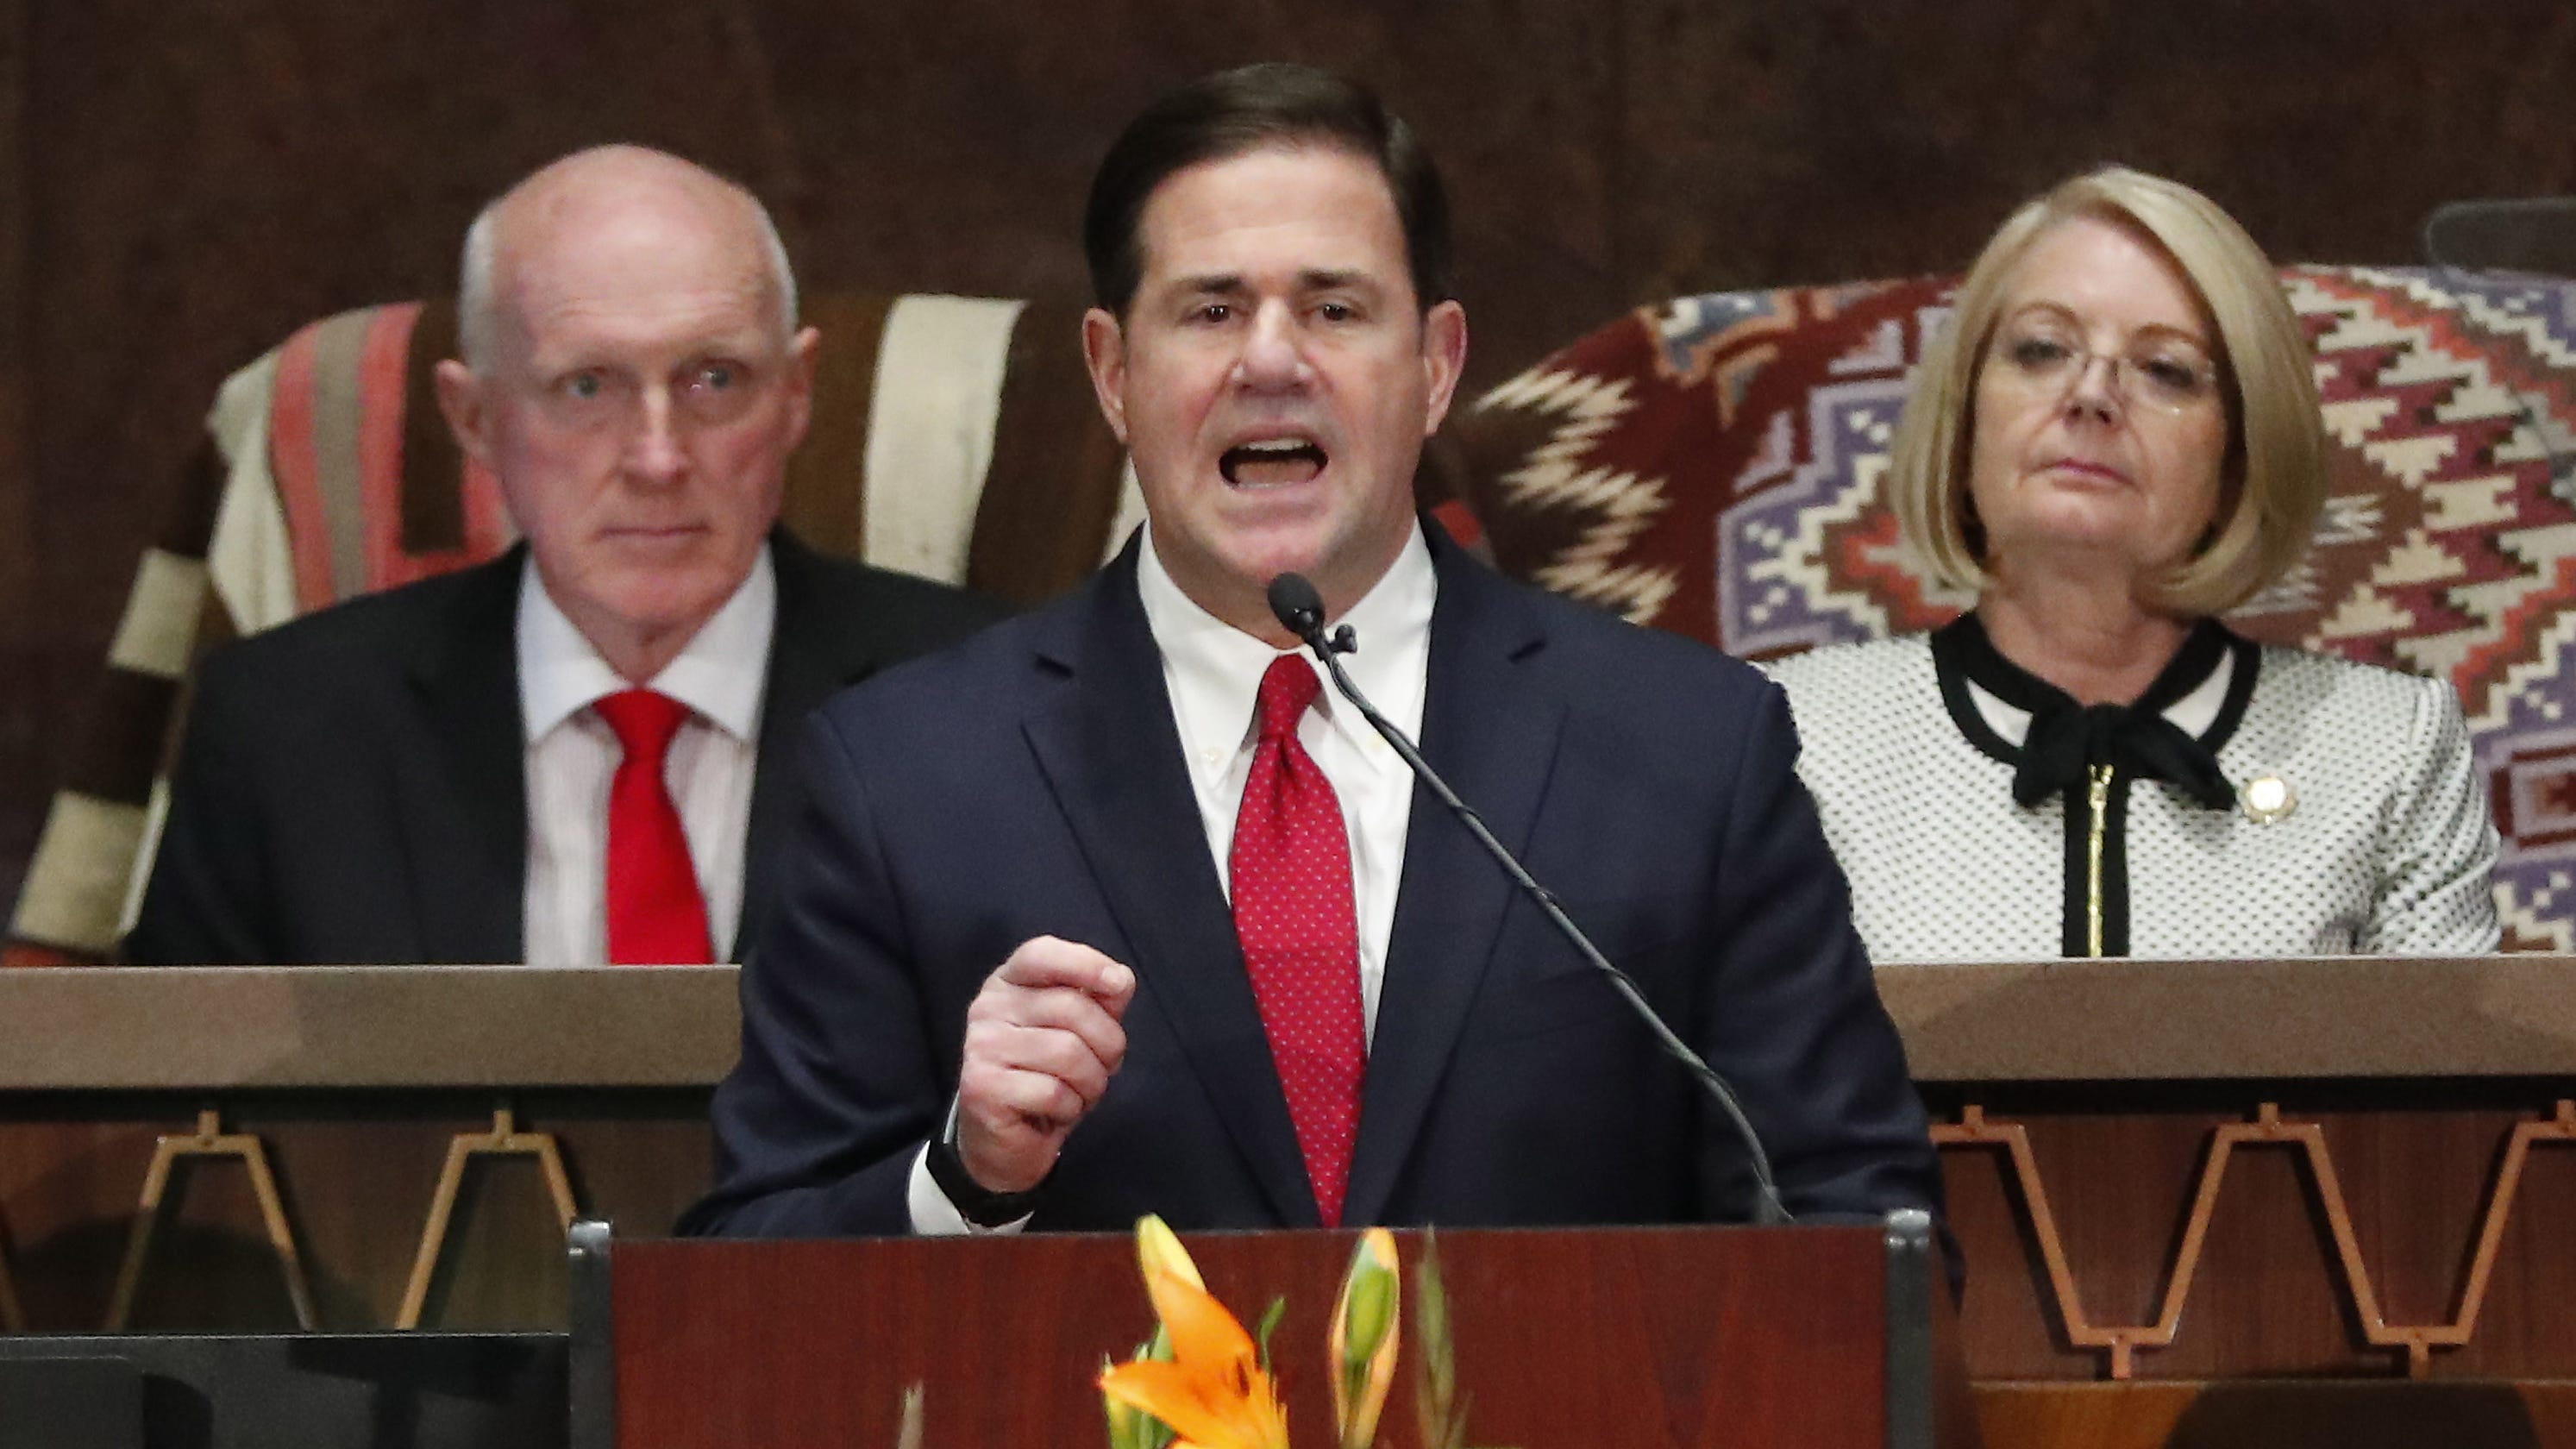 Ducey defends Arizona's record on water, says state has 'more to do' - AZCentral